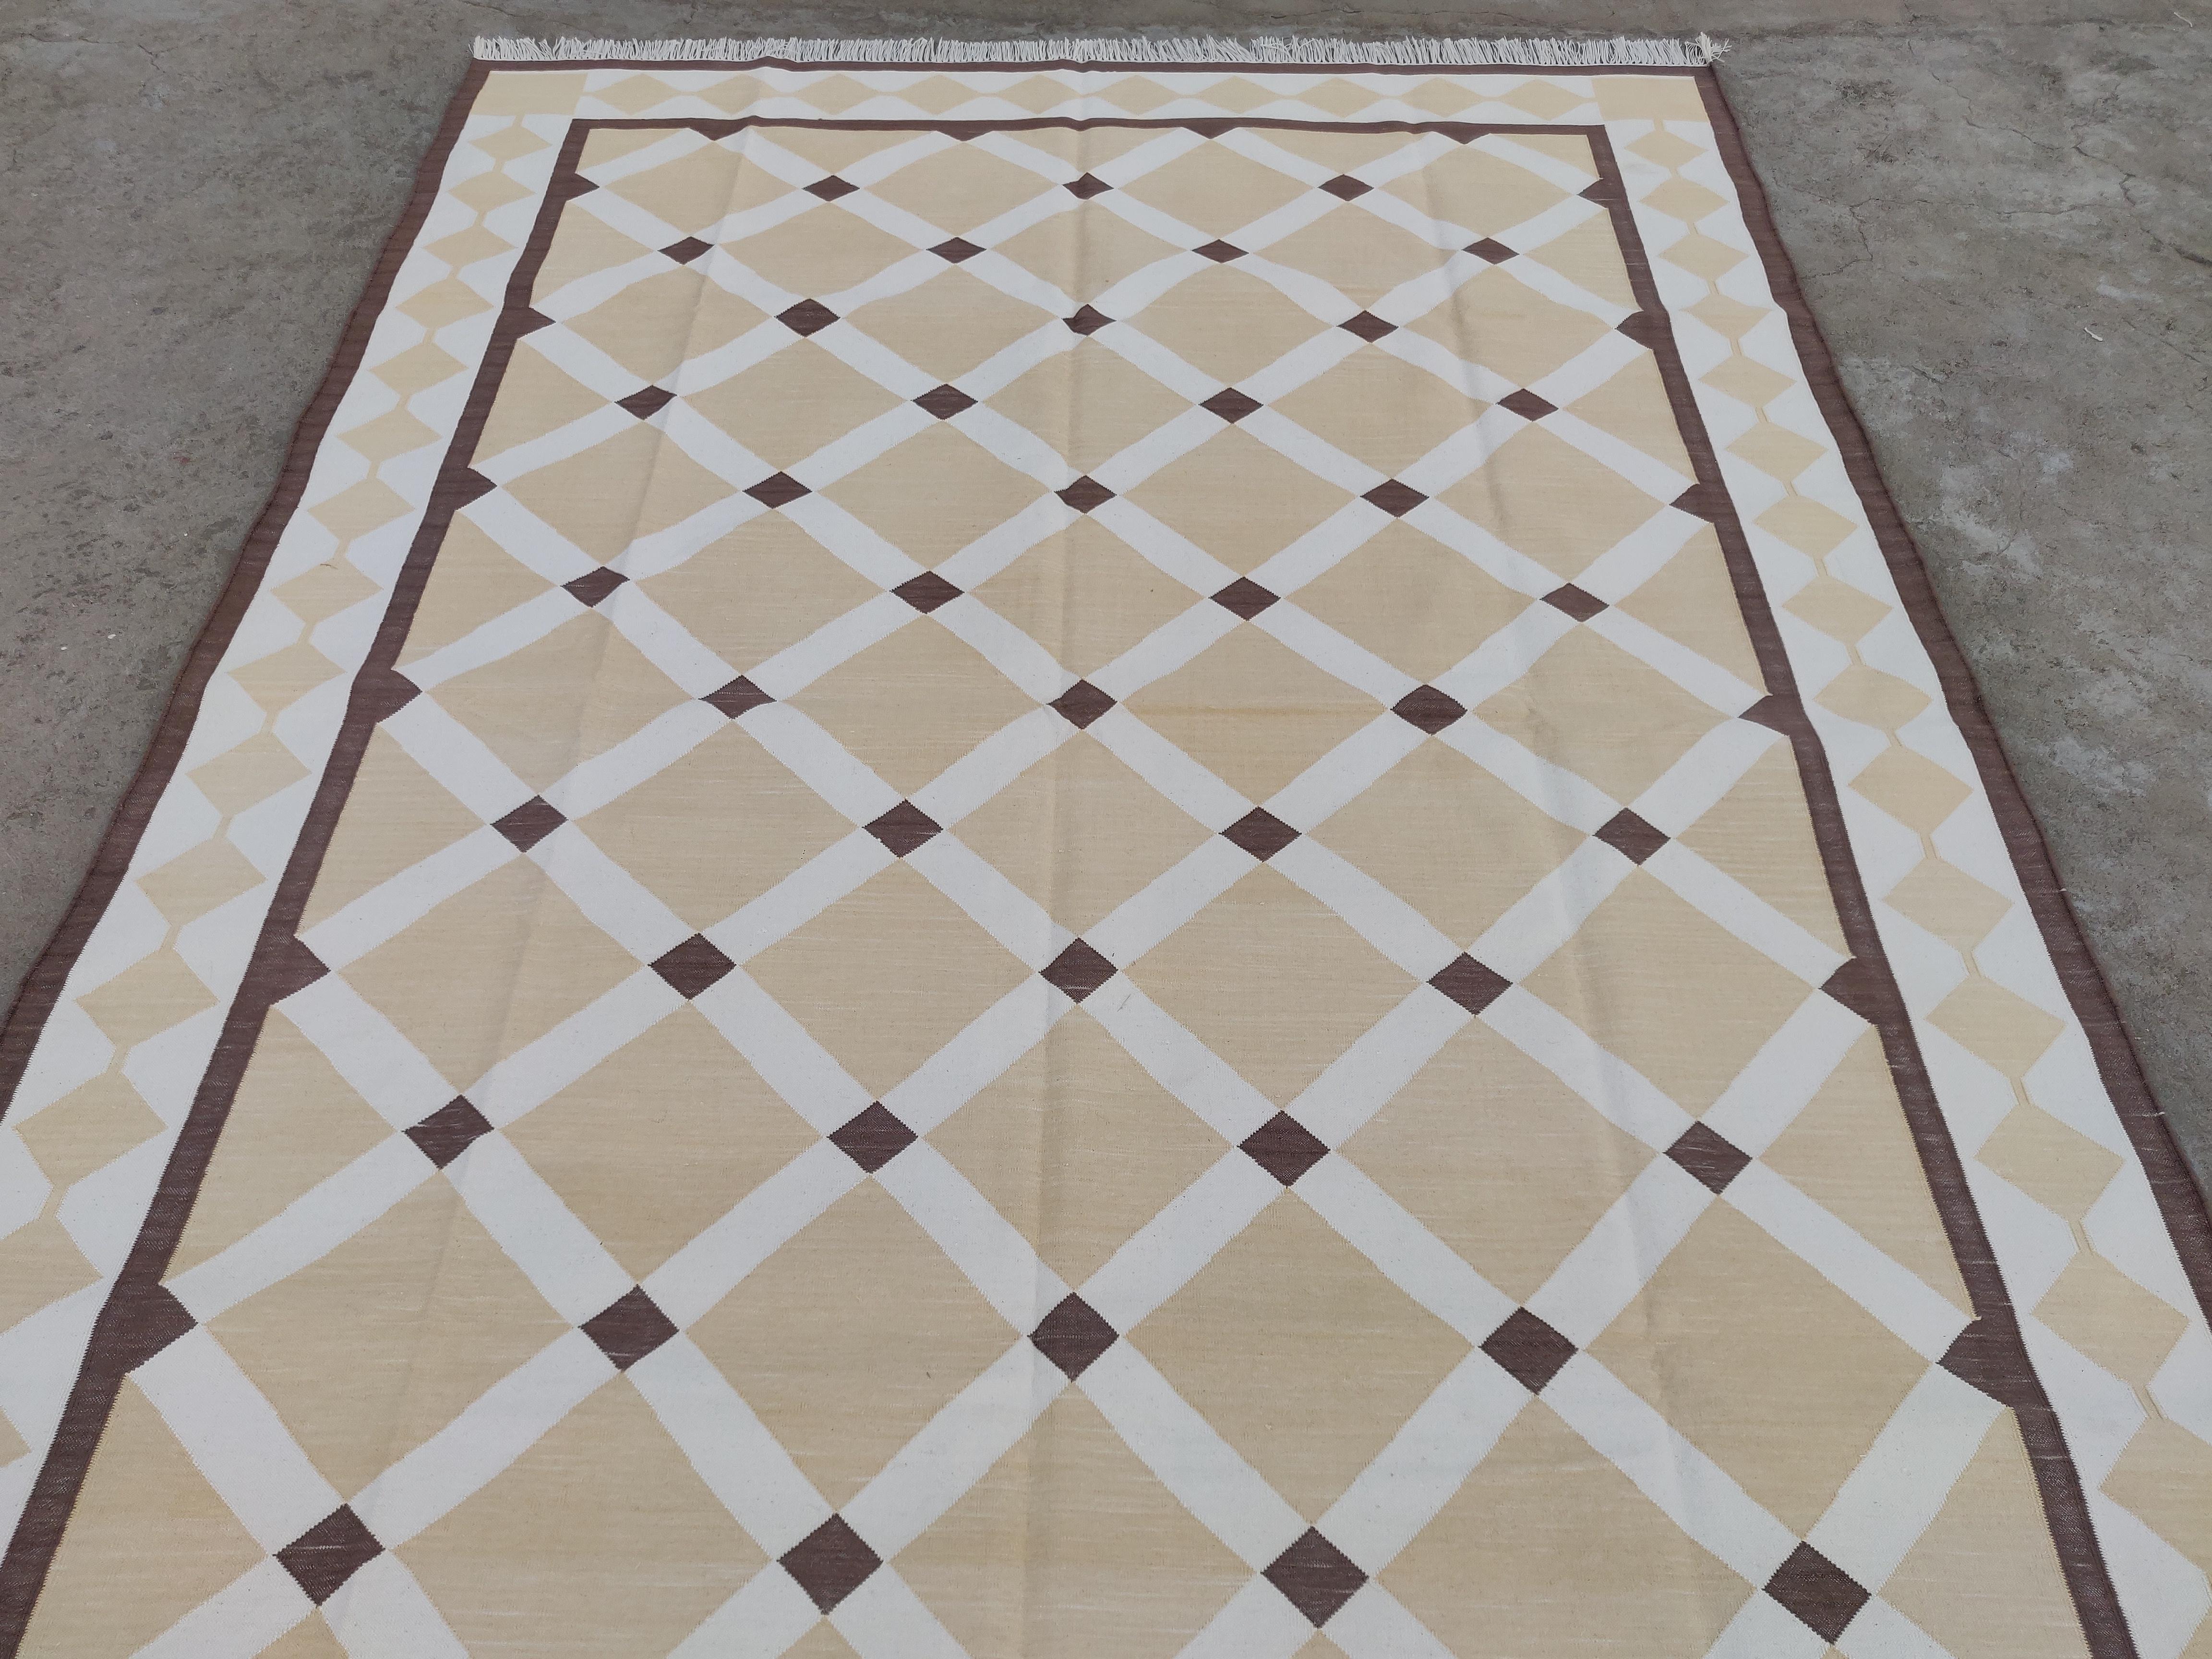 Contemporary Handmade Cotton Area Flat Weave Rug, 6x9 Beige & Brown Geometric Indian Dhurrie For Sale